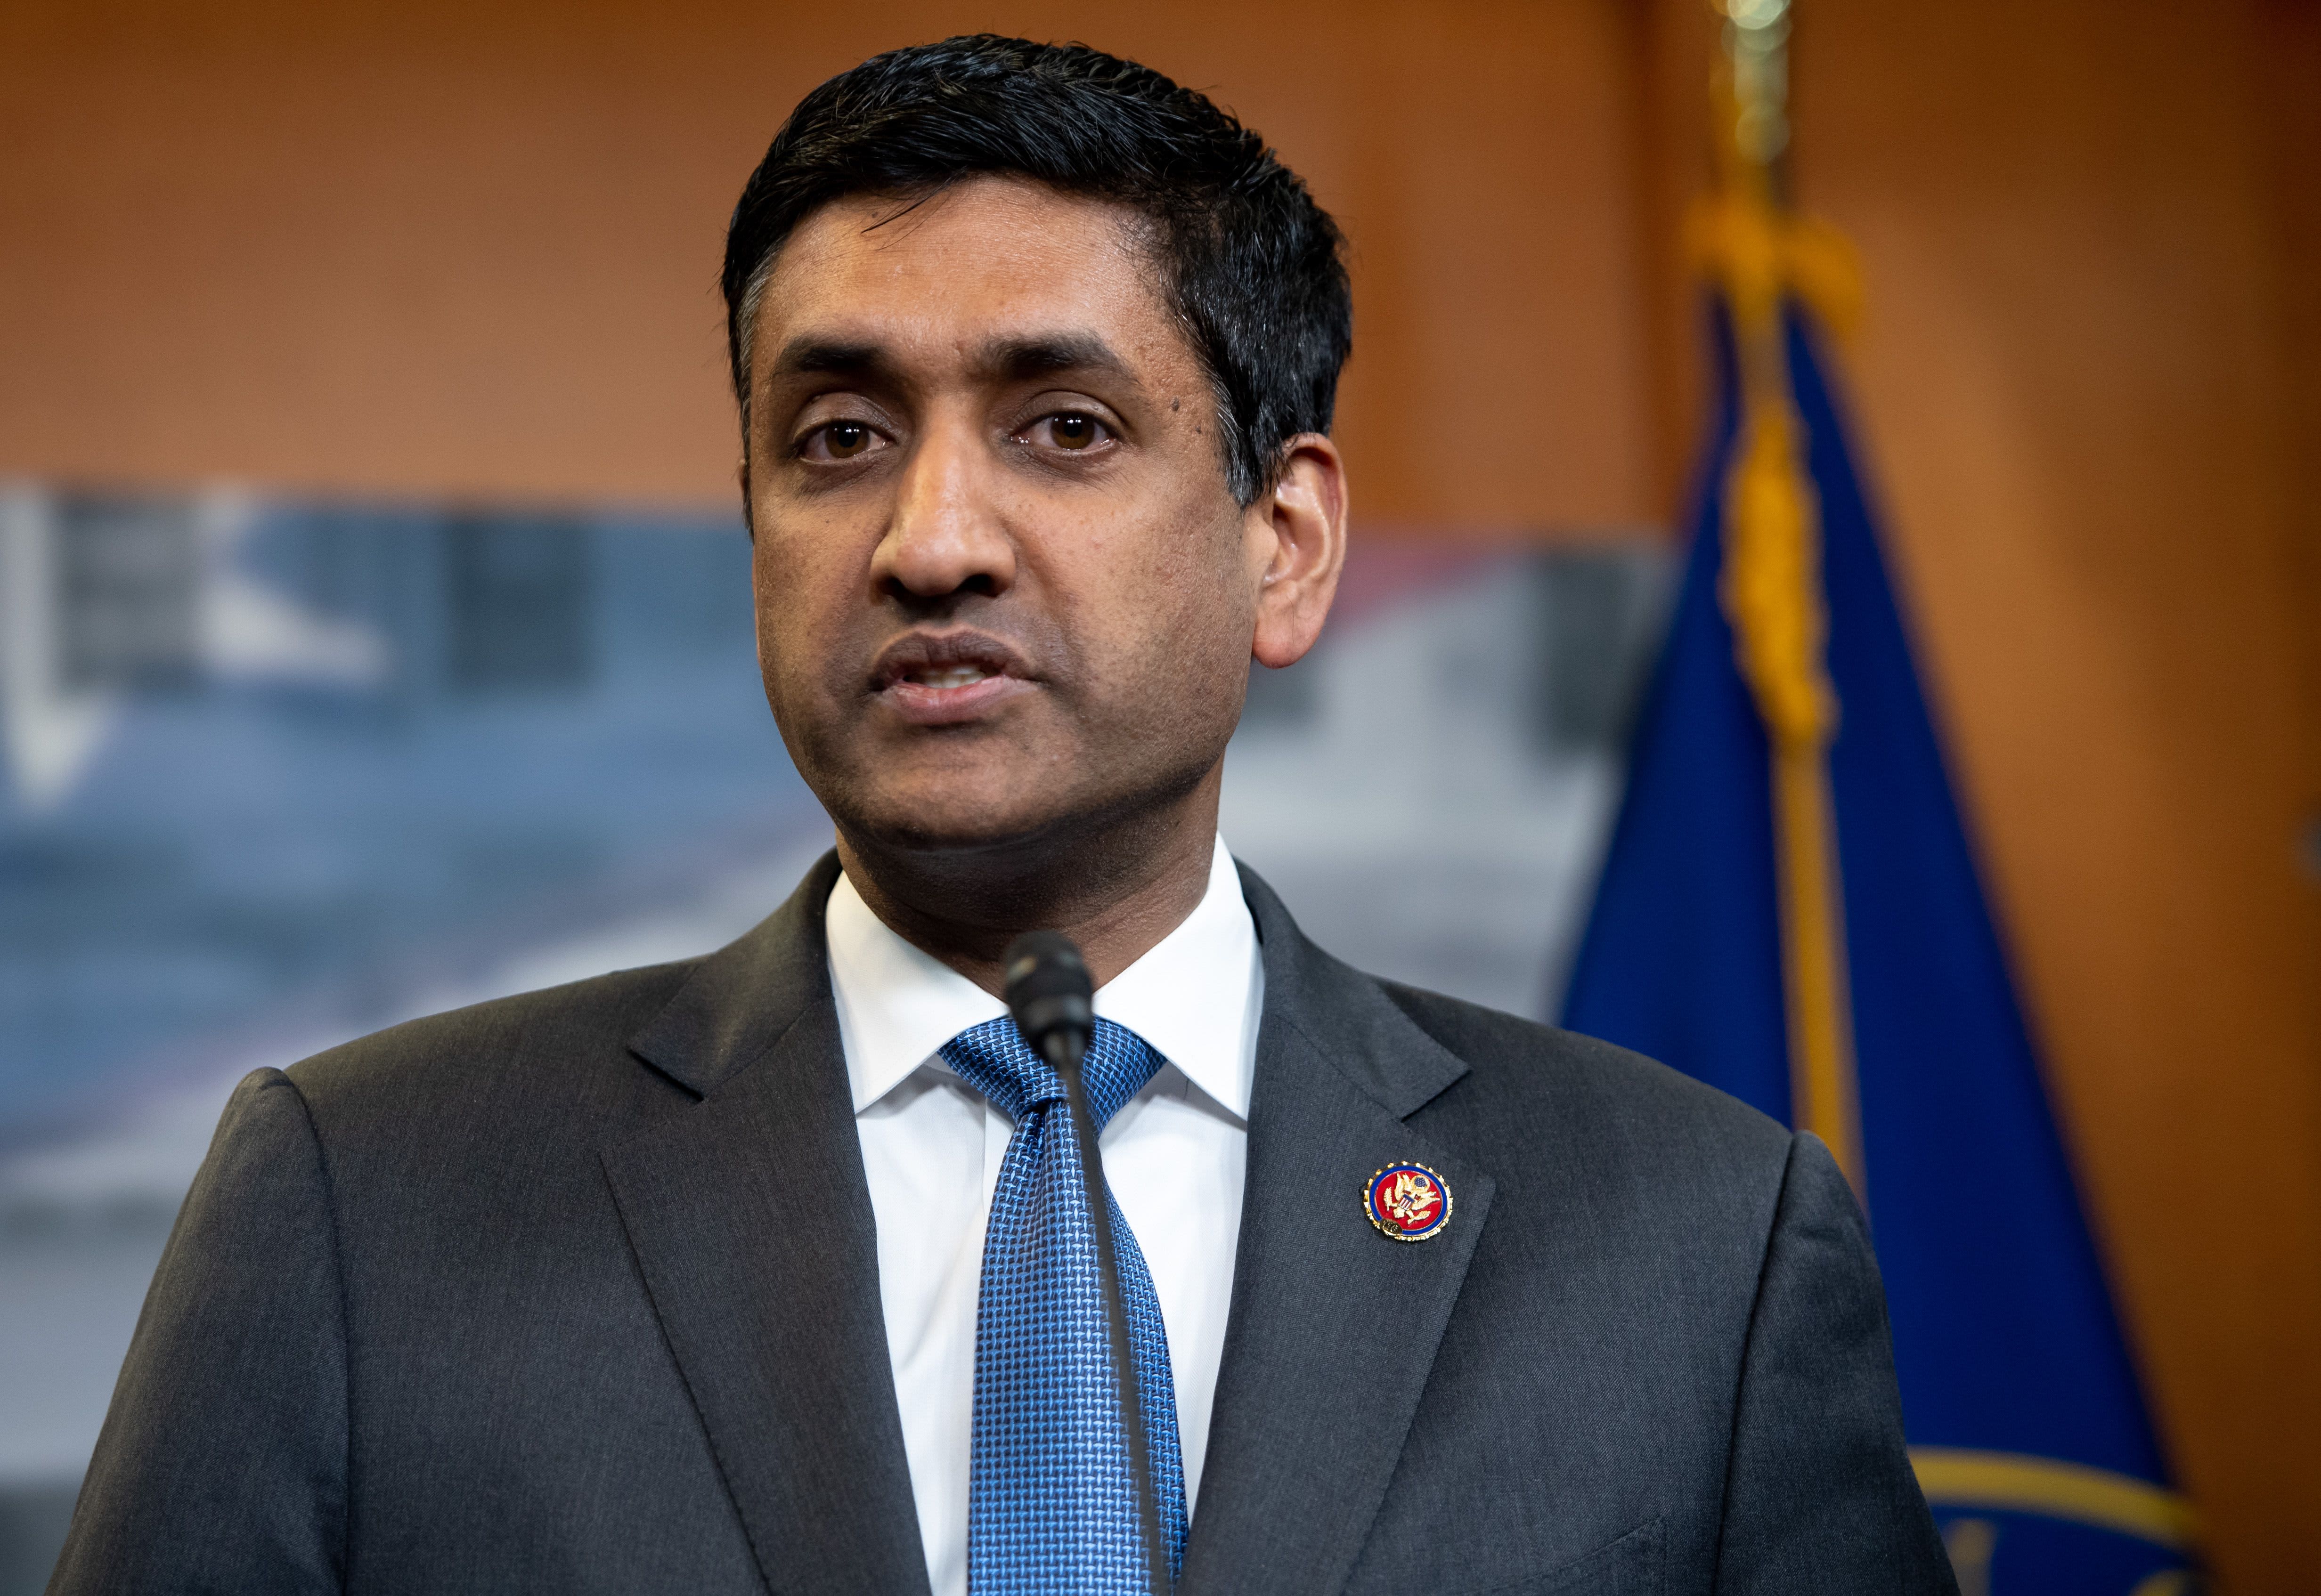 IRS would audit more millionaires, corporations under the Ro Khanna bill